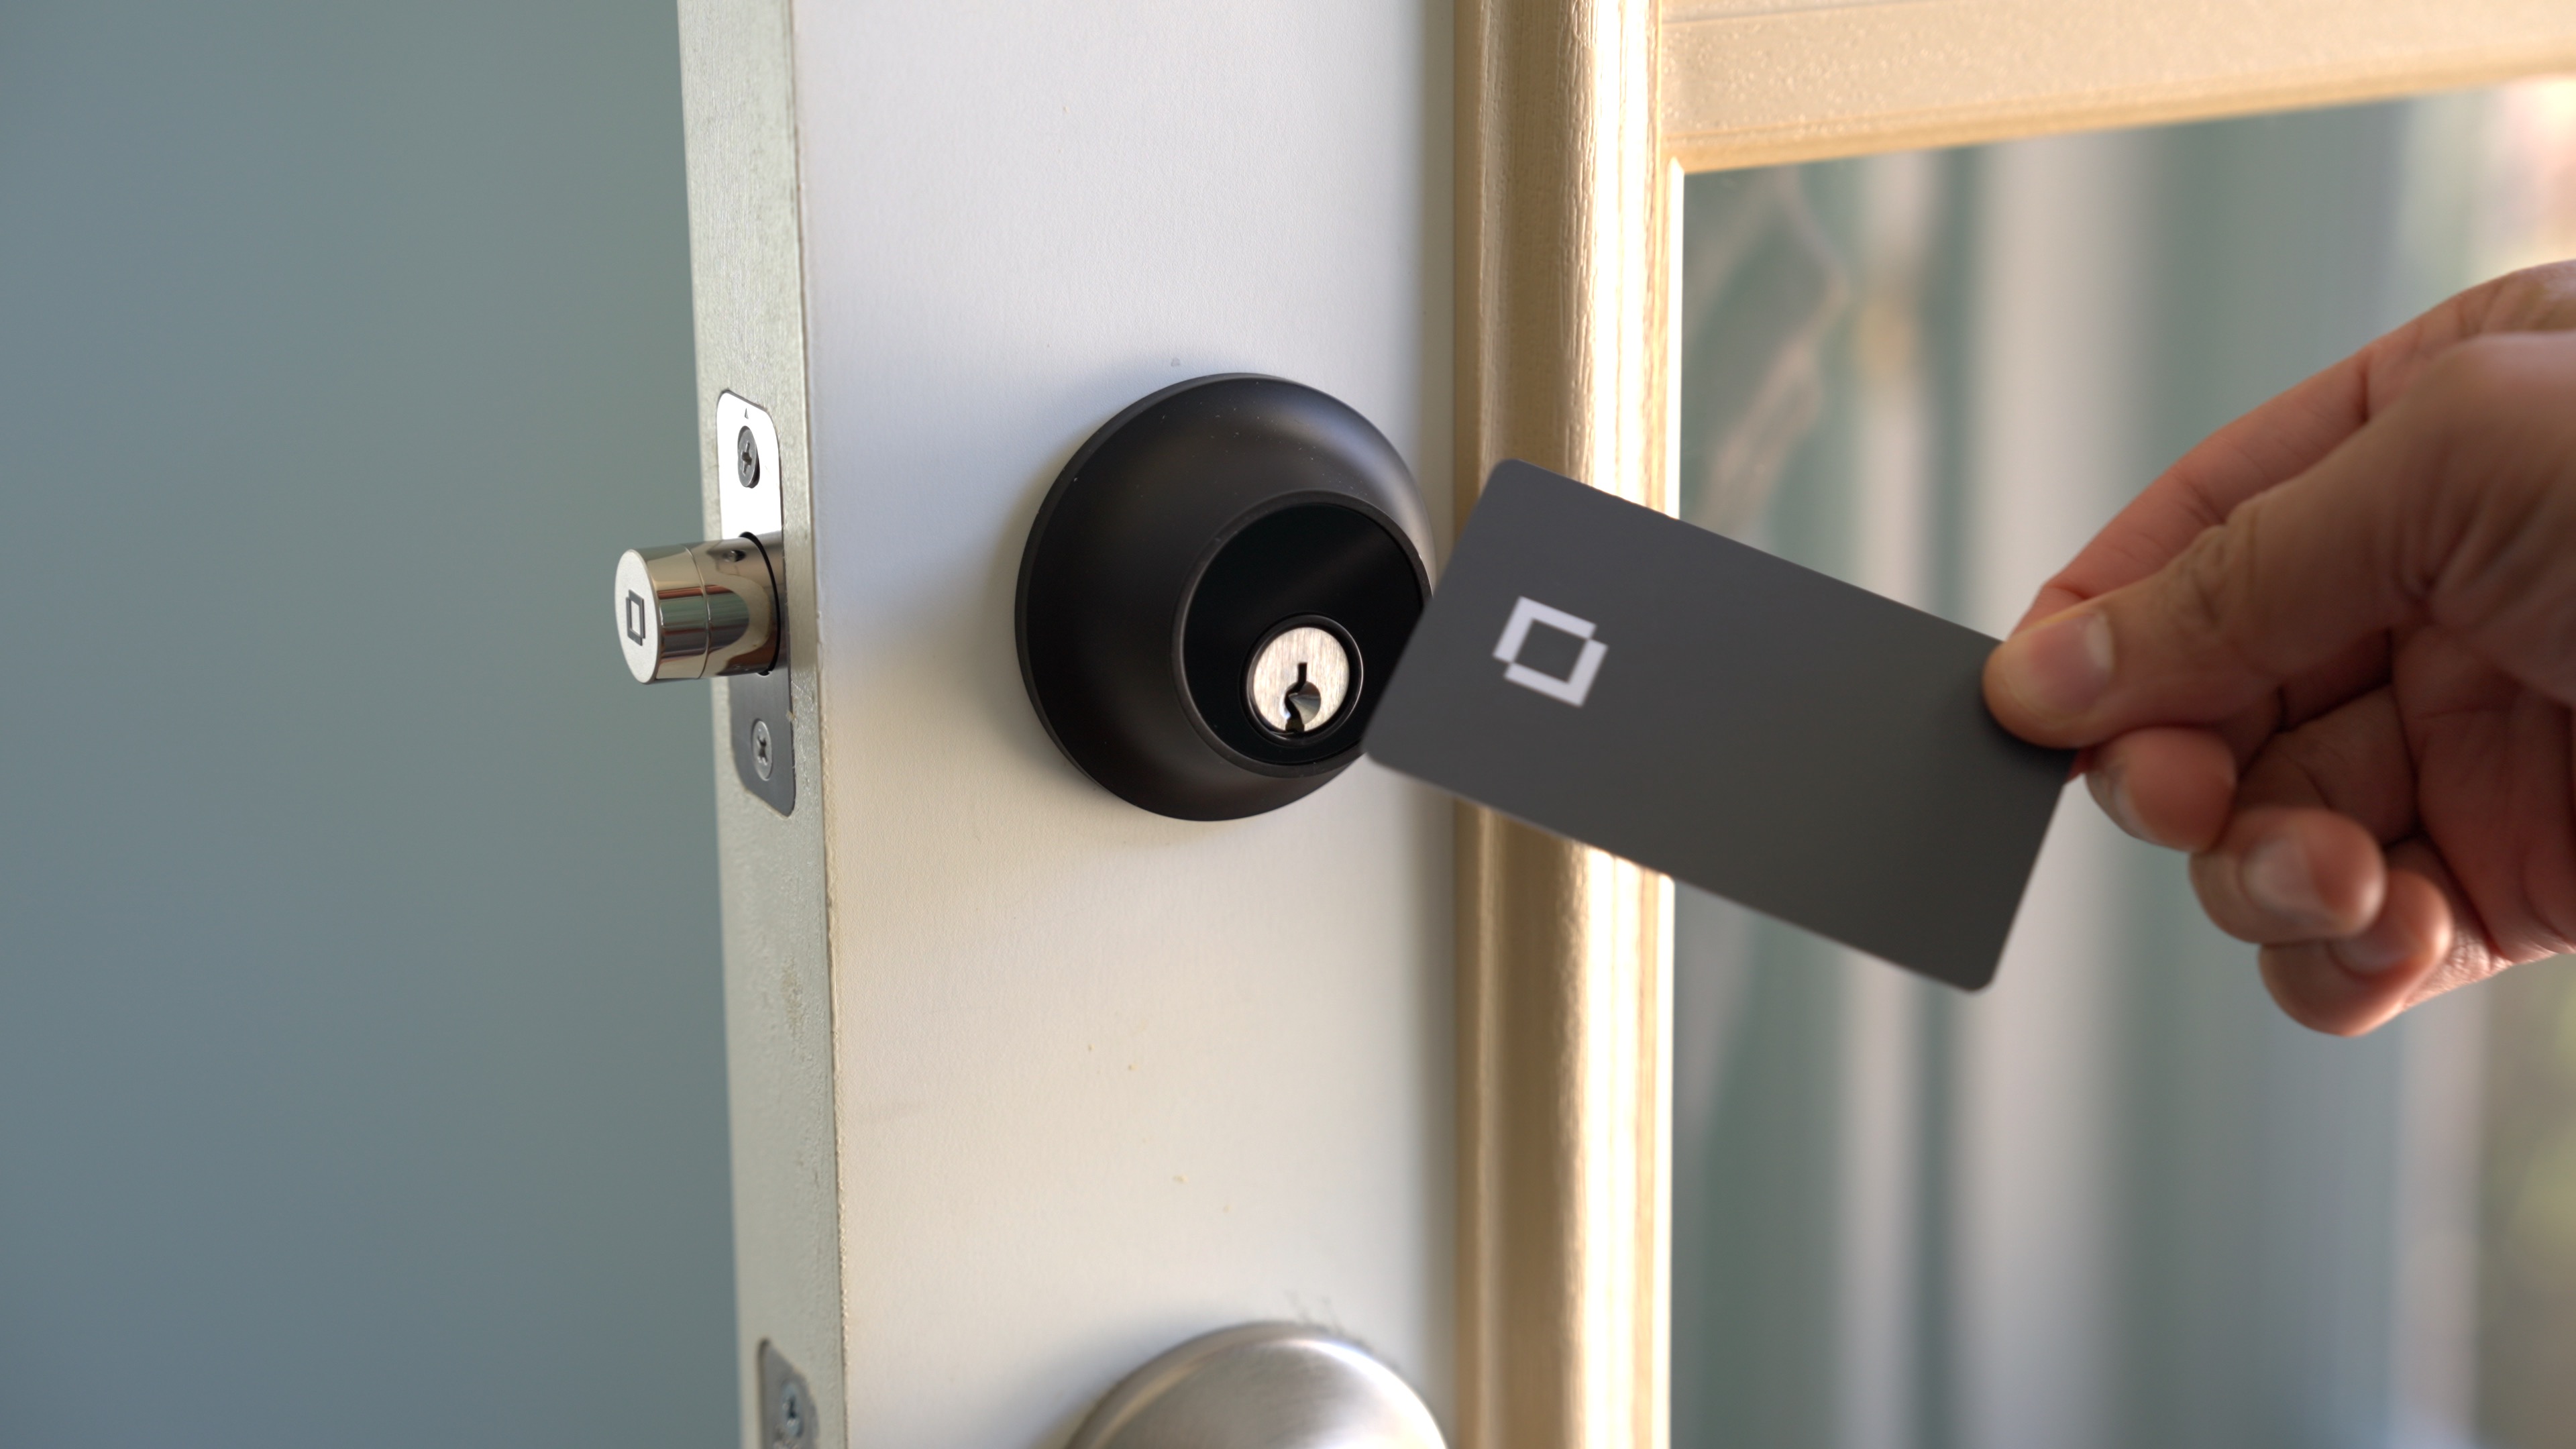 NFC key cards for Level Lock+.